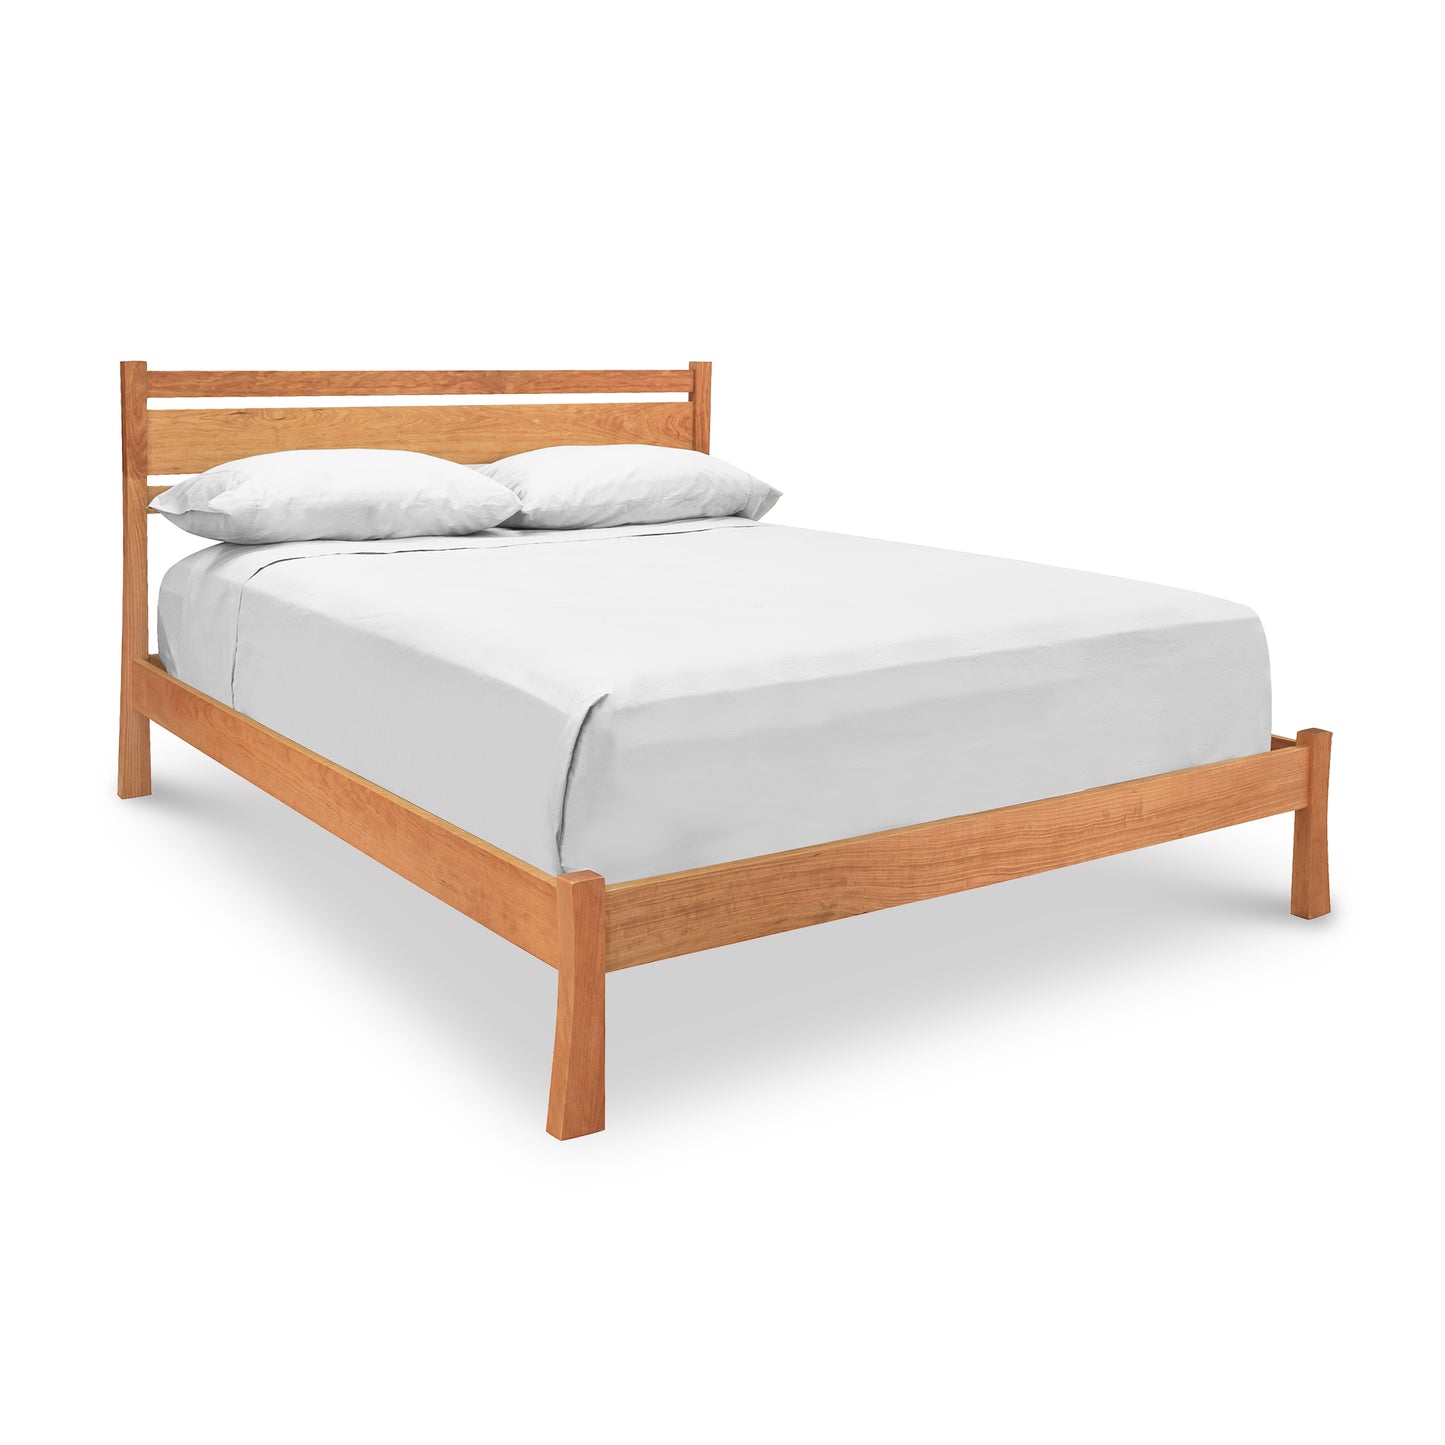 A Vermont Furniture Designs Horizon Platform Bed frame, crafted from eco-friendly oil-finished wood, with a white mattress and two pillows, isolated on a white background.